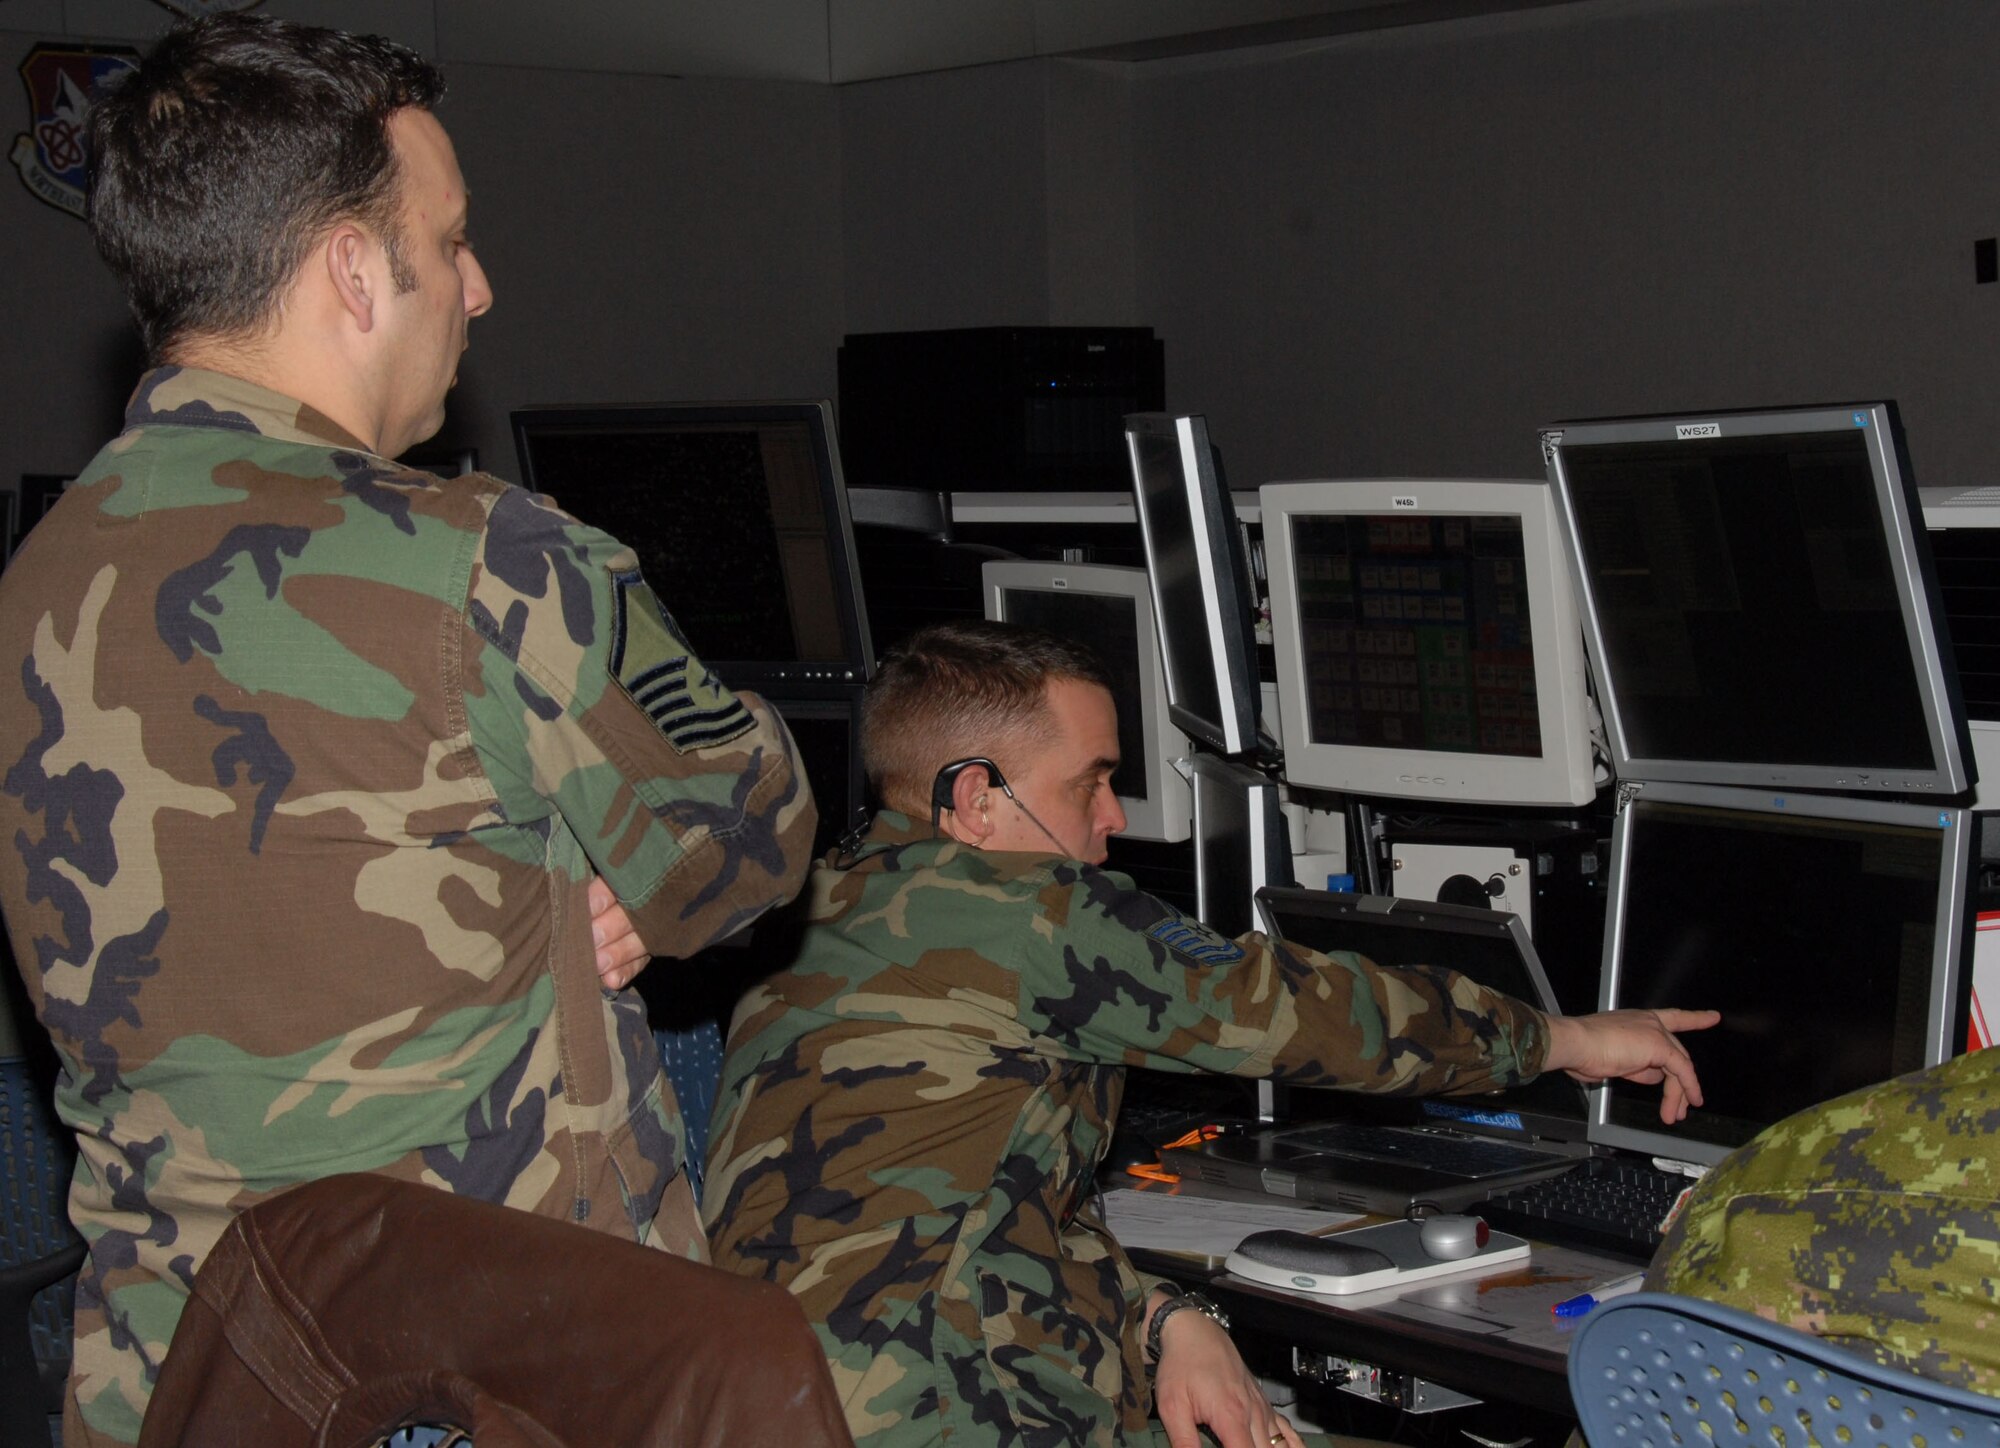 Members from the Northeast Air Defense Sector perform their command and control mission in order to prevent air attacks against the U.S. by responding to unknown, unwanted and unauthorized air activity approaching and operating within U.S. sovereign airspace.  (U.S. Air Force Photo/174th Fighter Wing Visual Information)